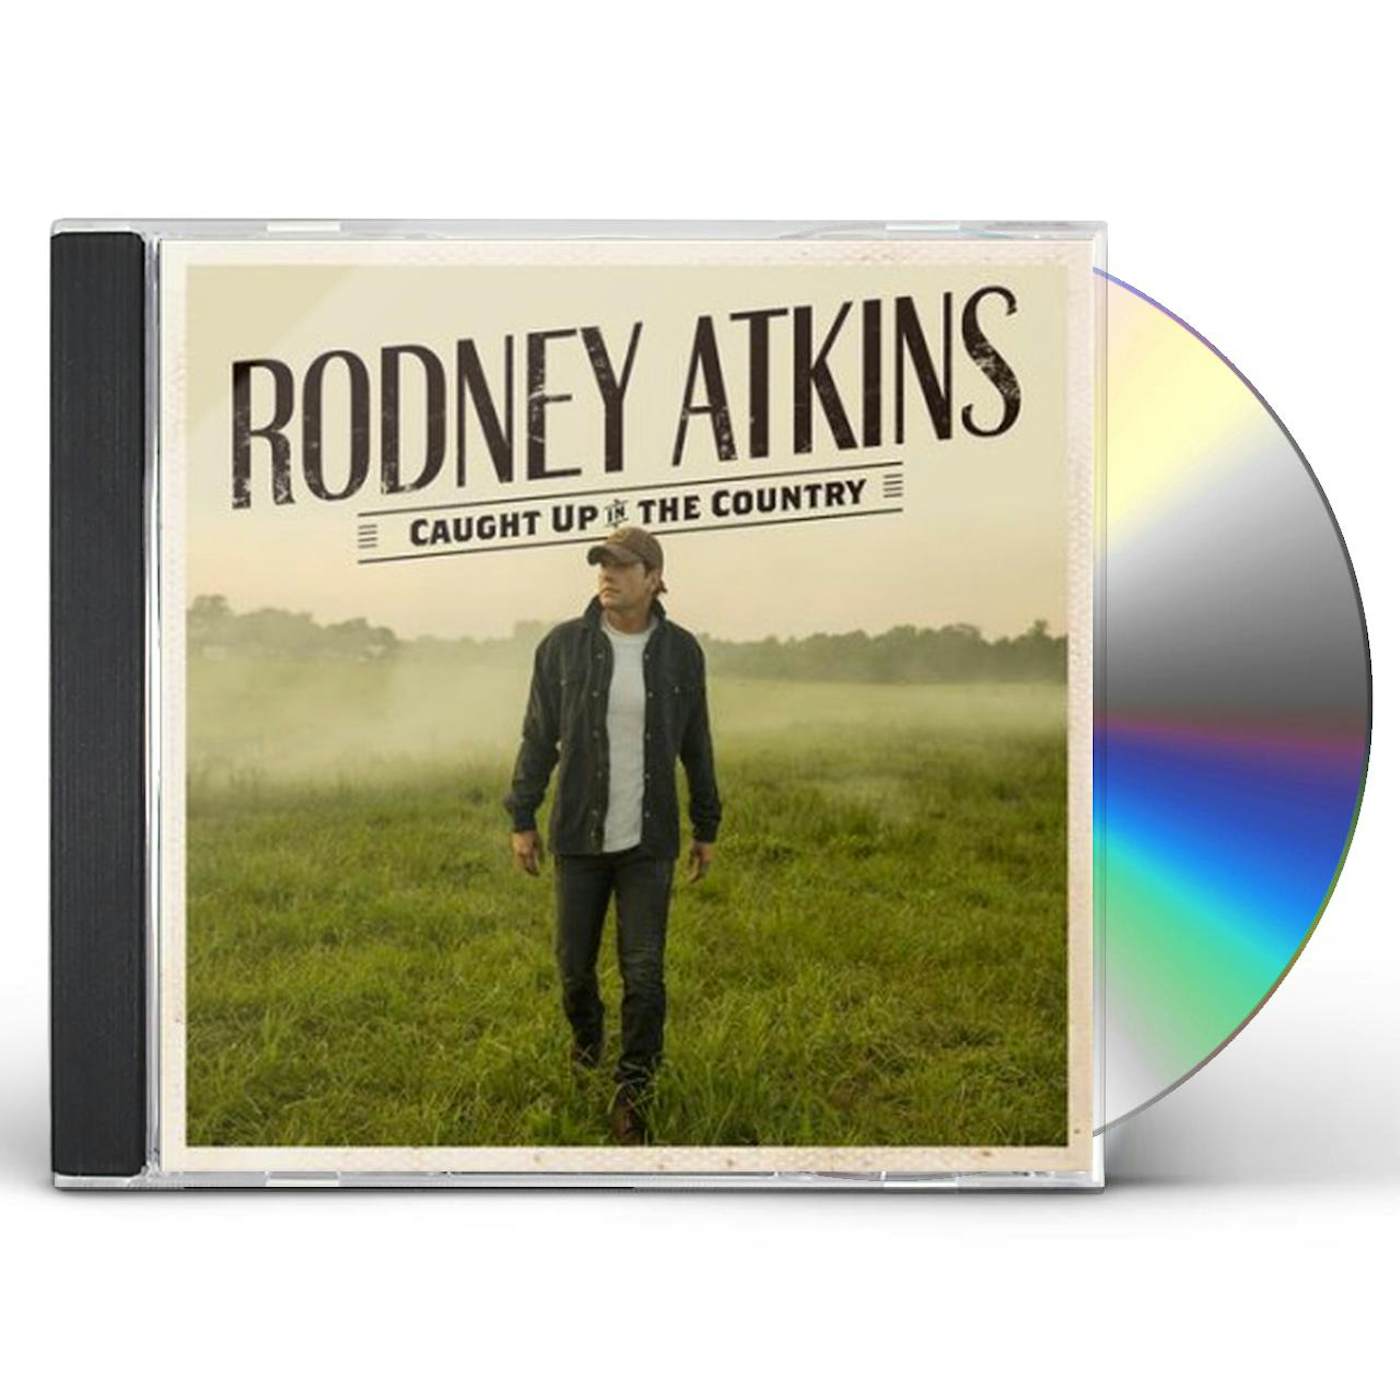 Rodney Atkins CAUGHT UP IN THE COUNTRY CD